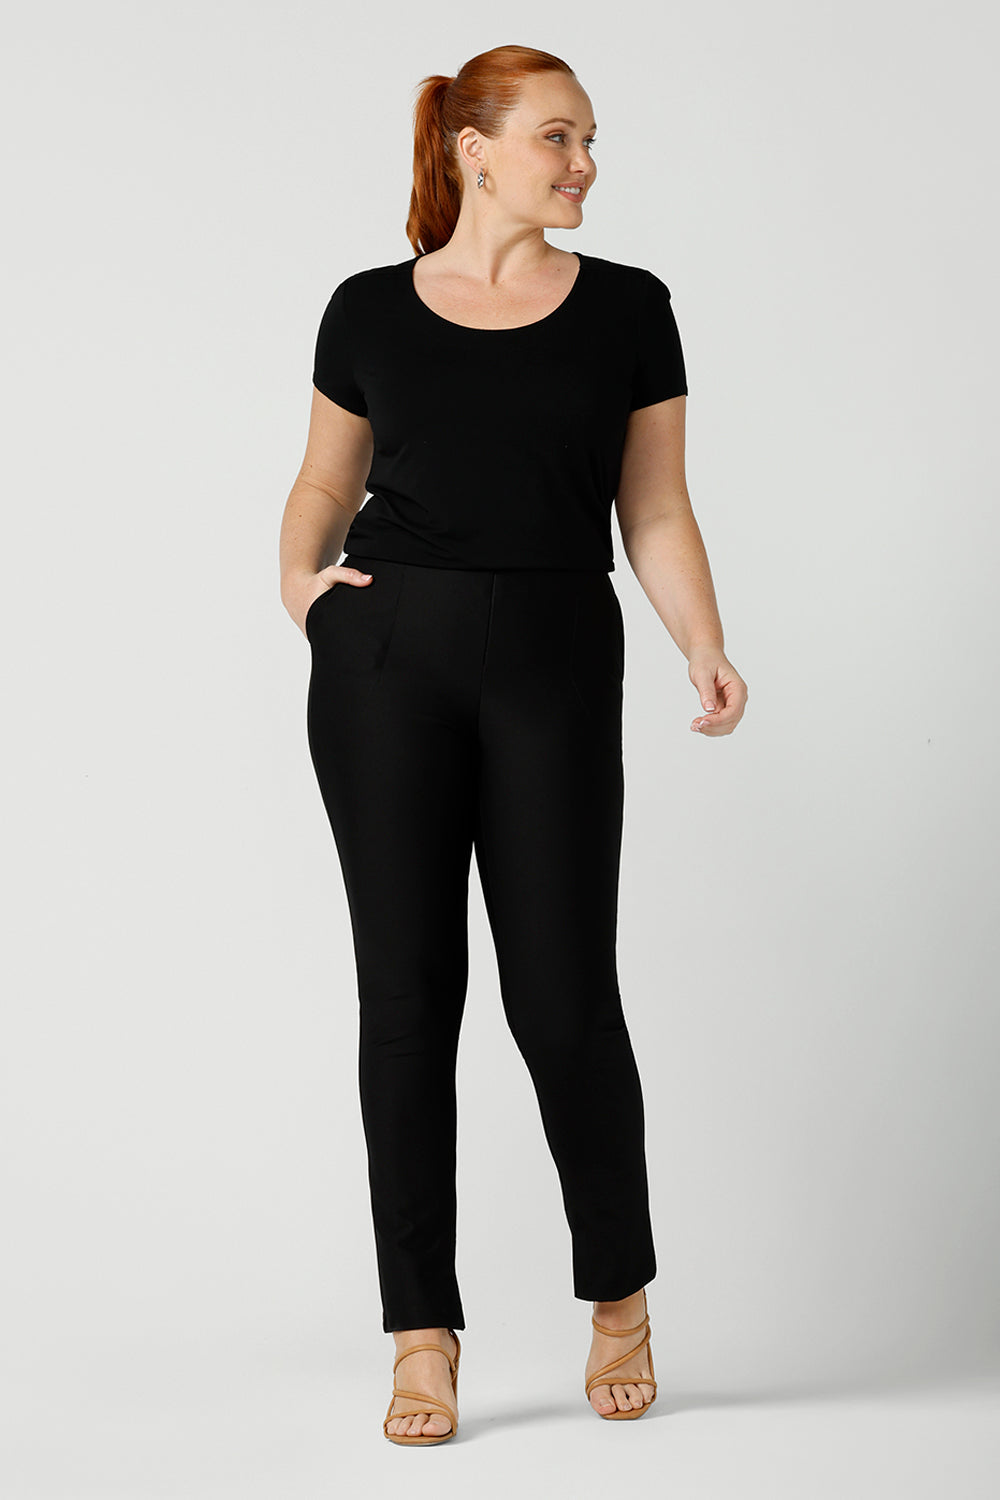 A good black top for your capsule wardrobe, this round neck, short sleeve top in black bamboo jersey is comfortable for work and casual wear. Worn with slim leg black work pants, both are made in Australia by ladies clothing brand, Leina & Fleur. Shop black tops for women online in sizes 8 to 24 in L&F's online fashion boutique